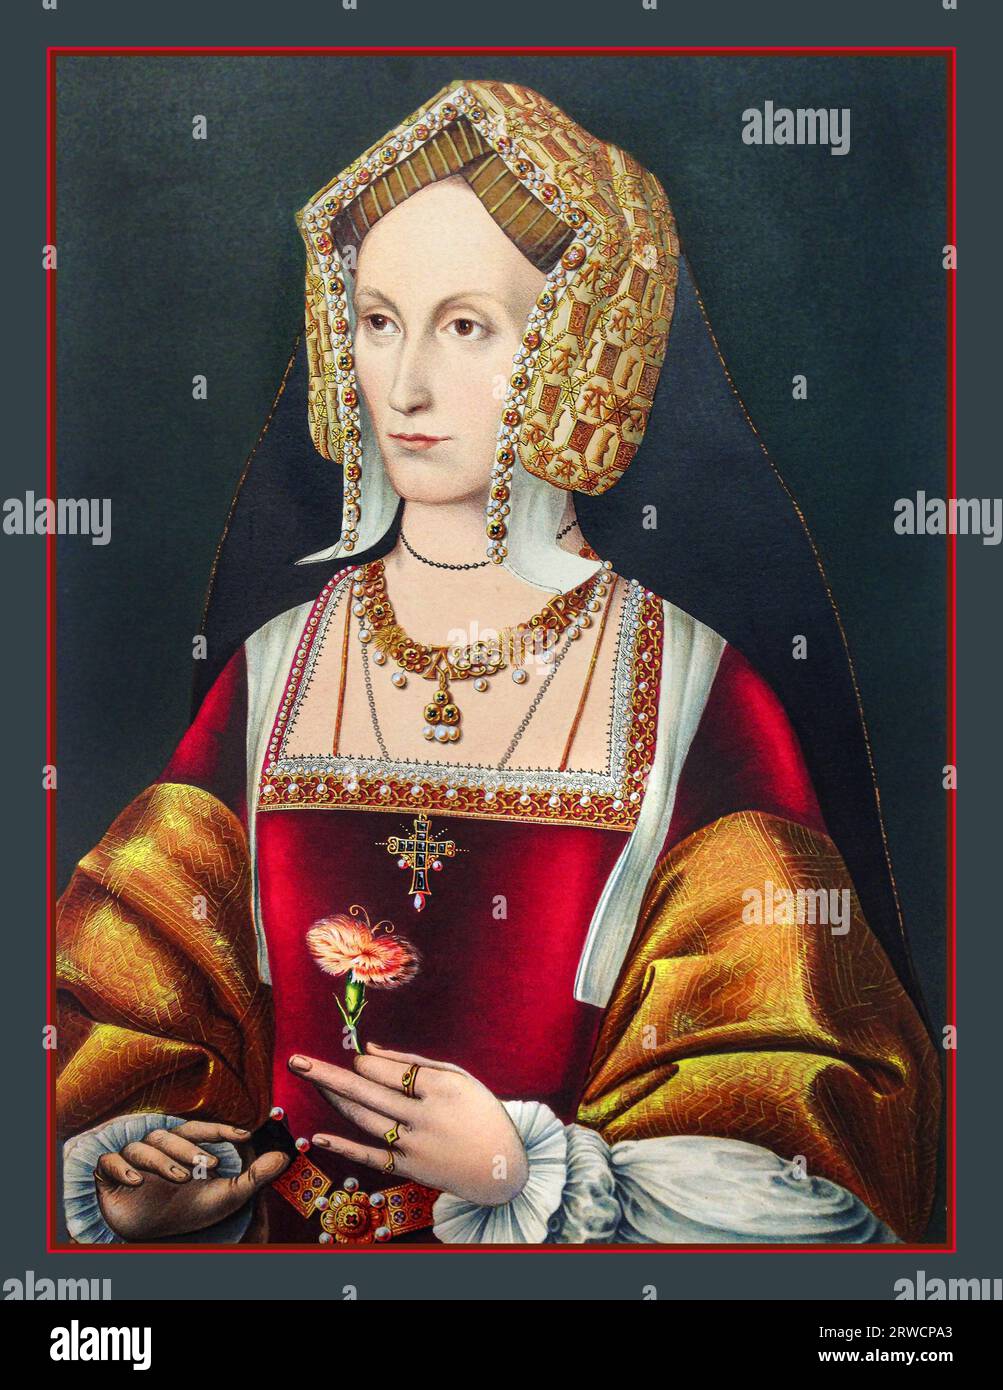 Joan de Beauchamp, Baroness Bergavenny (née FitzAlan; 1375 – 14 November 1435) was an English noblewoman, and the wife of William de Beauchamp, 1st Baron Bergavenny of the Welsh Marches. Portrait of Joan, Baroness Bergavenny; half length looking to left; wearing English gable hood, golde girdle, cross and embroidery decorated with her initials, and holding flower; from painting at Strawberry Hill. Coloured aquatint Stock Photo